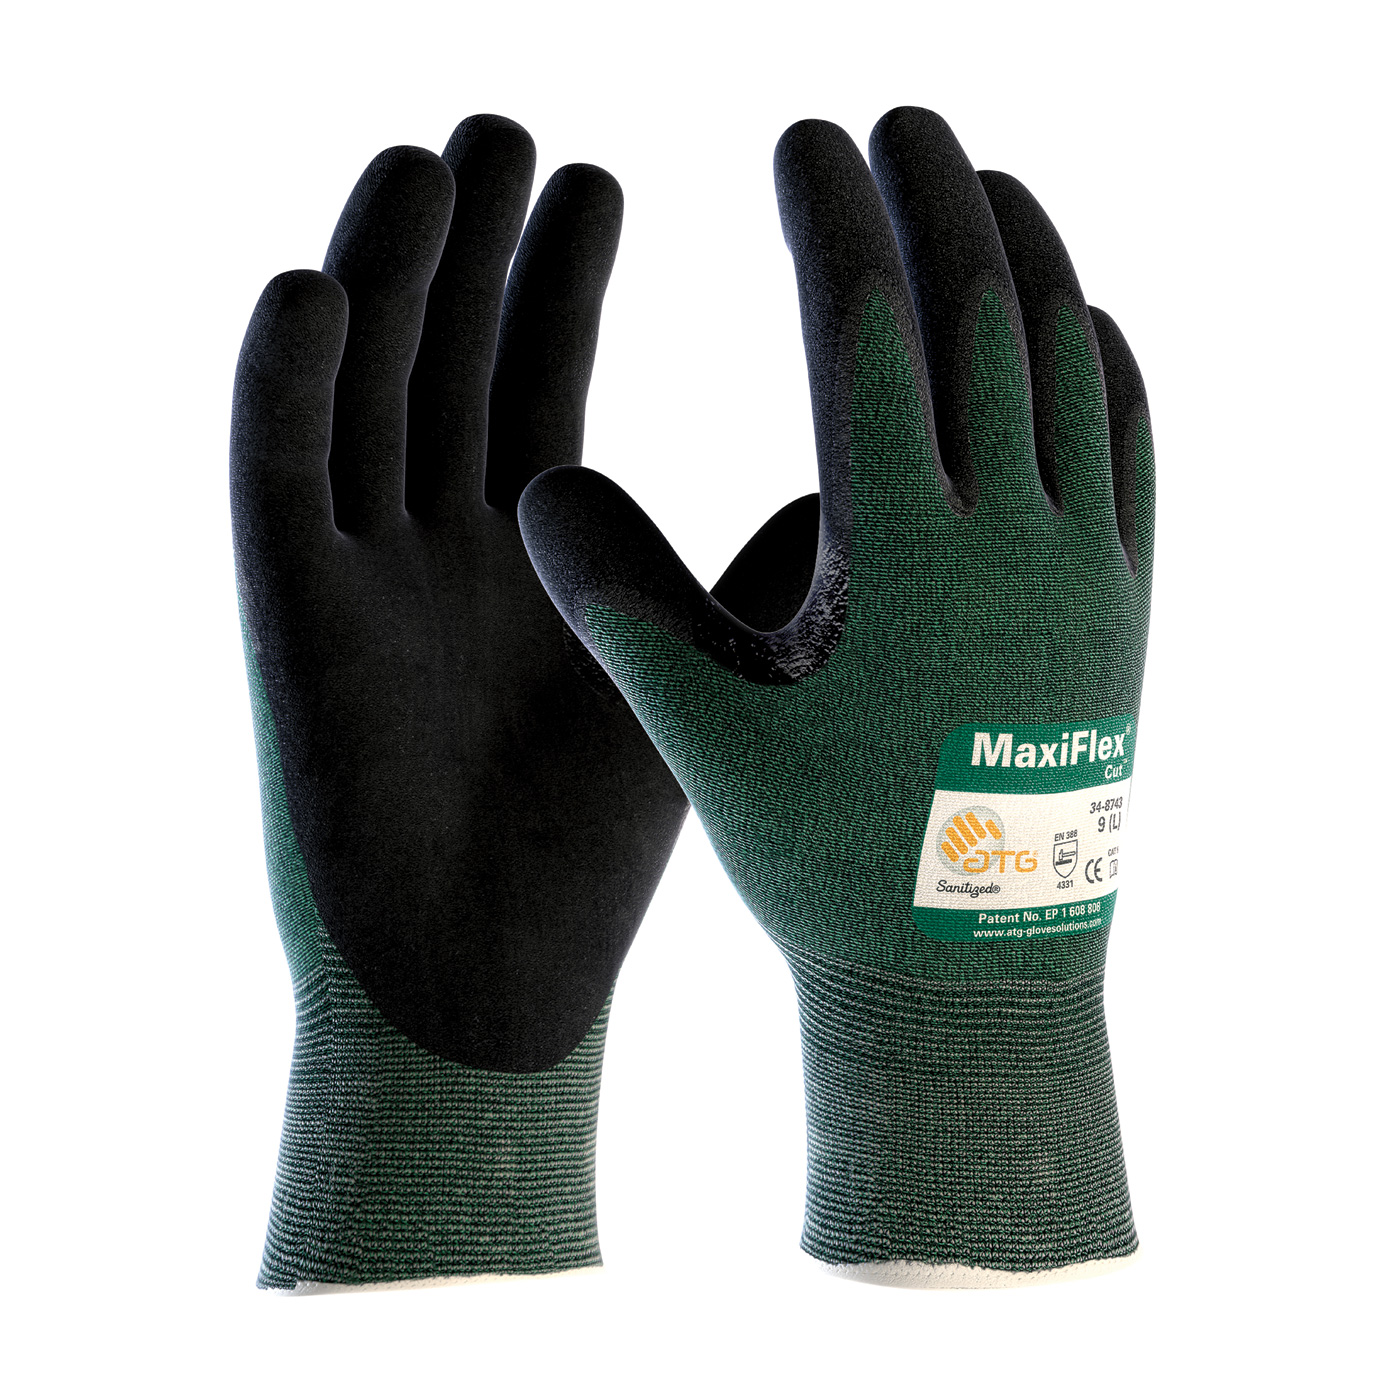 PIP 34-8743/S MaxiFlex Cut Seamless Knit Engineered Yarn Glove with Premium Nitrile Coated MicroFoam Grip on Palm & Fingers - Small PID-34 8743 S